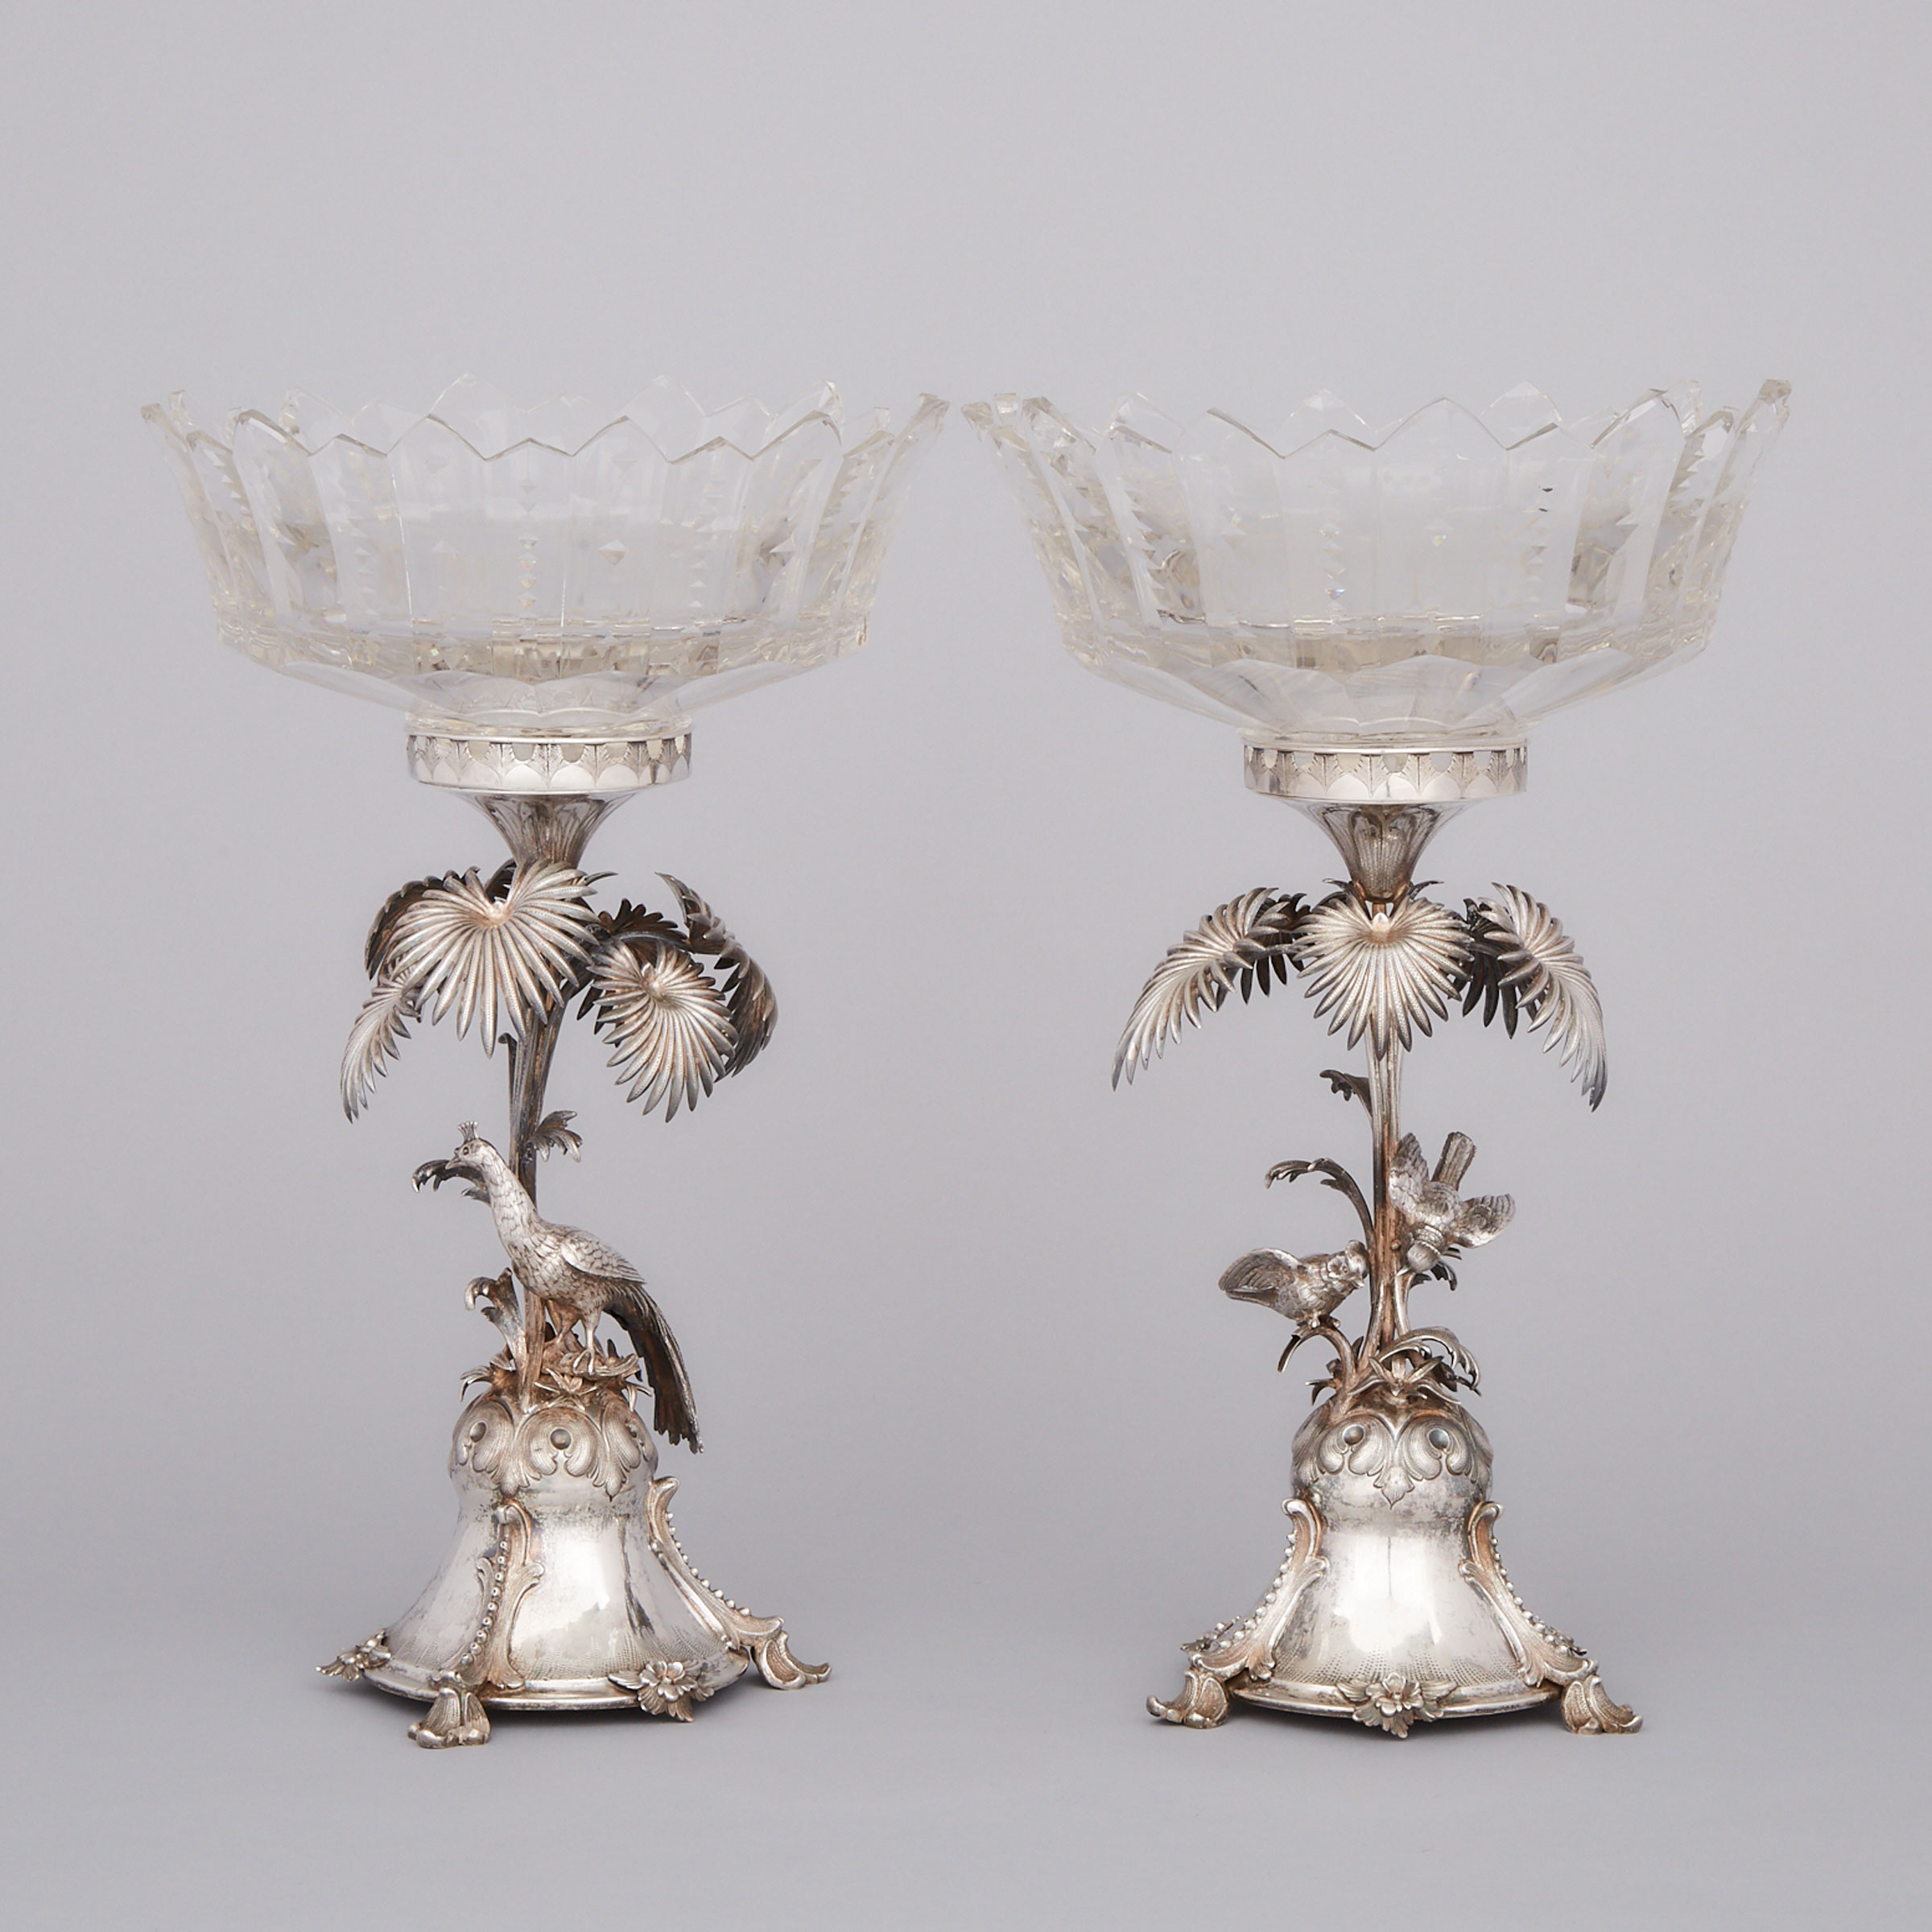 Pair of German Silver and Cut Glass Comports, c.1880